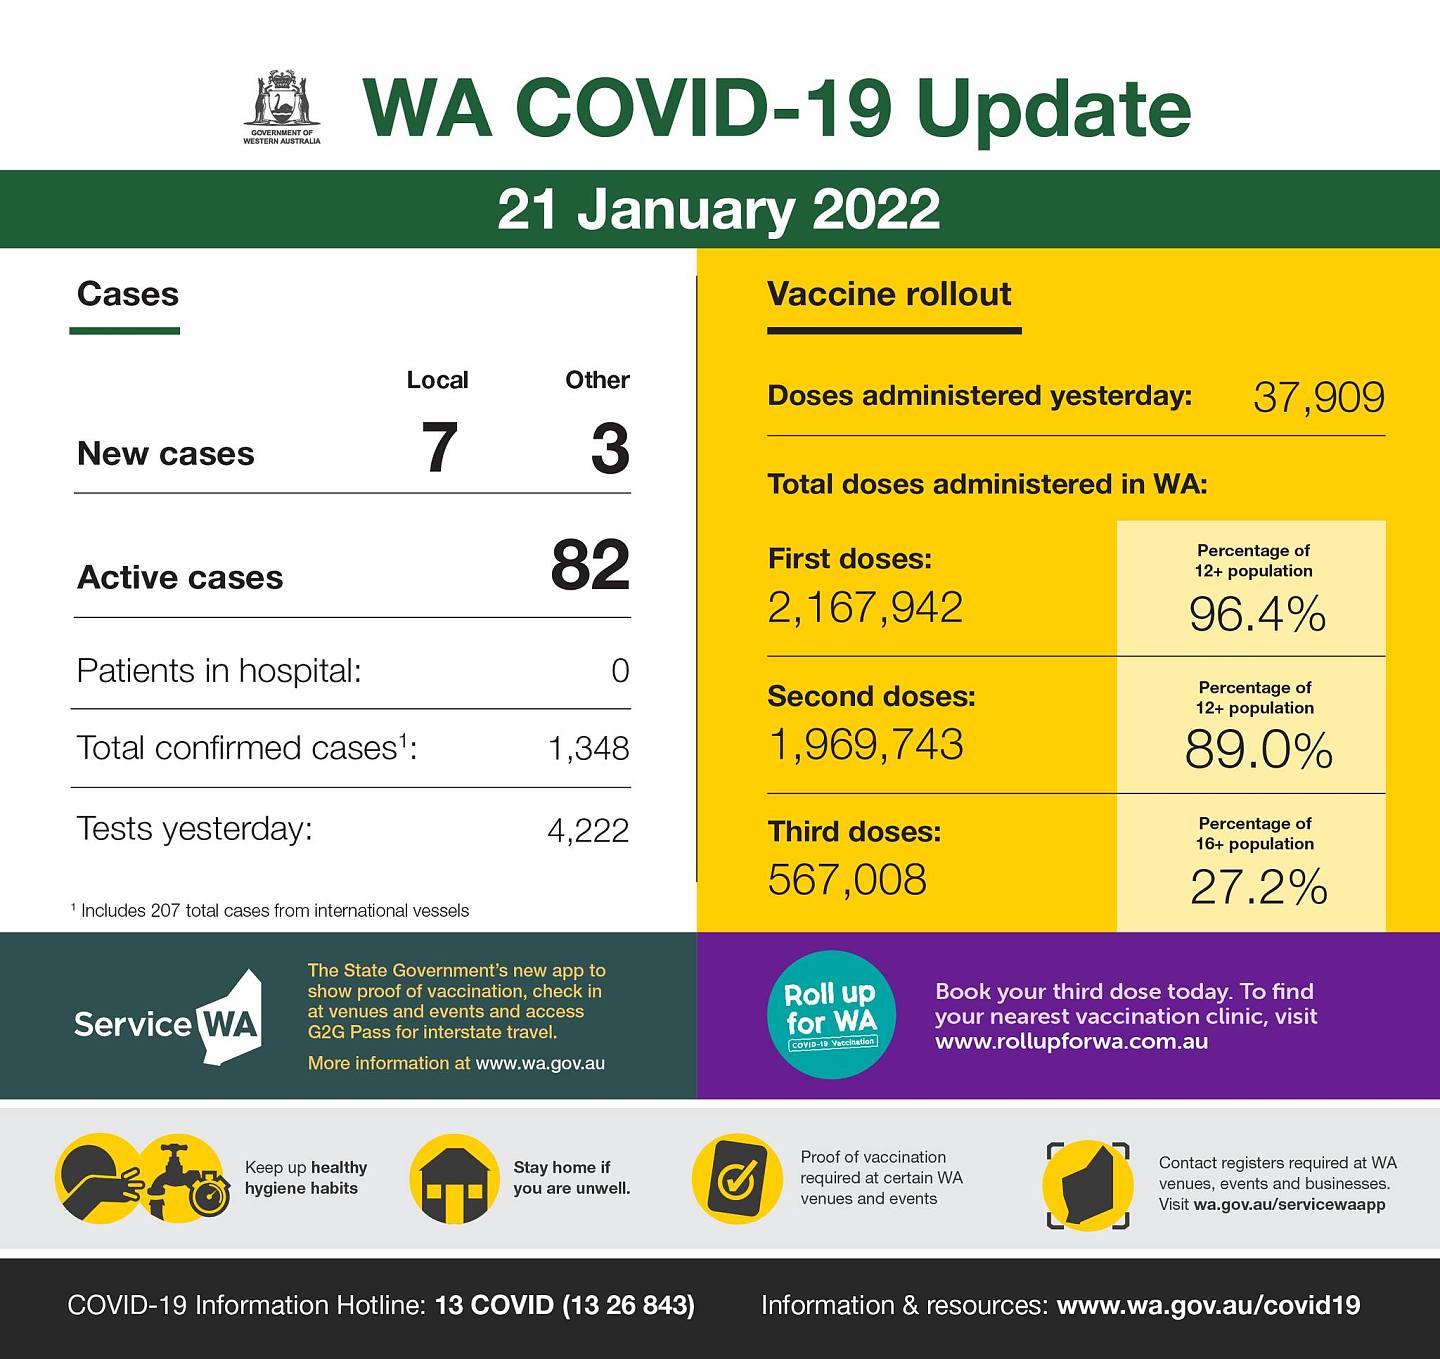 May be an image of text that says 'WESTERNAUSTRALIA Cases WA COVID-19 Update 21 January 2022 Local Vaccine rollout New cases 7 3 Doses administered yesterday: Active cases 37,909 Total doses administered in WA: 82 Patients in hospital: First doses: 2,167,942 0 Total confirmed cases1: Percentage 2+population 96.4% 1,348 Tests yesterday: Second doses: 1,969,743 1Includes cases 4,222 Percentage population 89.0% nationa vessels Third doses: 567 008 Service WA Percentage population 27.2% Rollup WA Keepup healthy hygiene abits Boyou third dose today. find neare clinic, visit www.rollupforwa.com.au Stay home you unwell. aination reguired events COVID 19 Information Hotline: 13 COVID (13 26 843) WA venues, itwa.gov.au/servicewaapp Information gov.au/covid19'